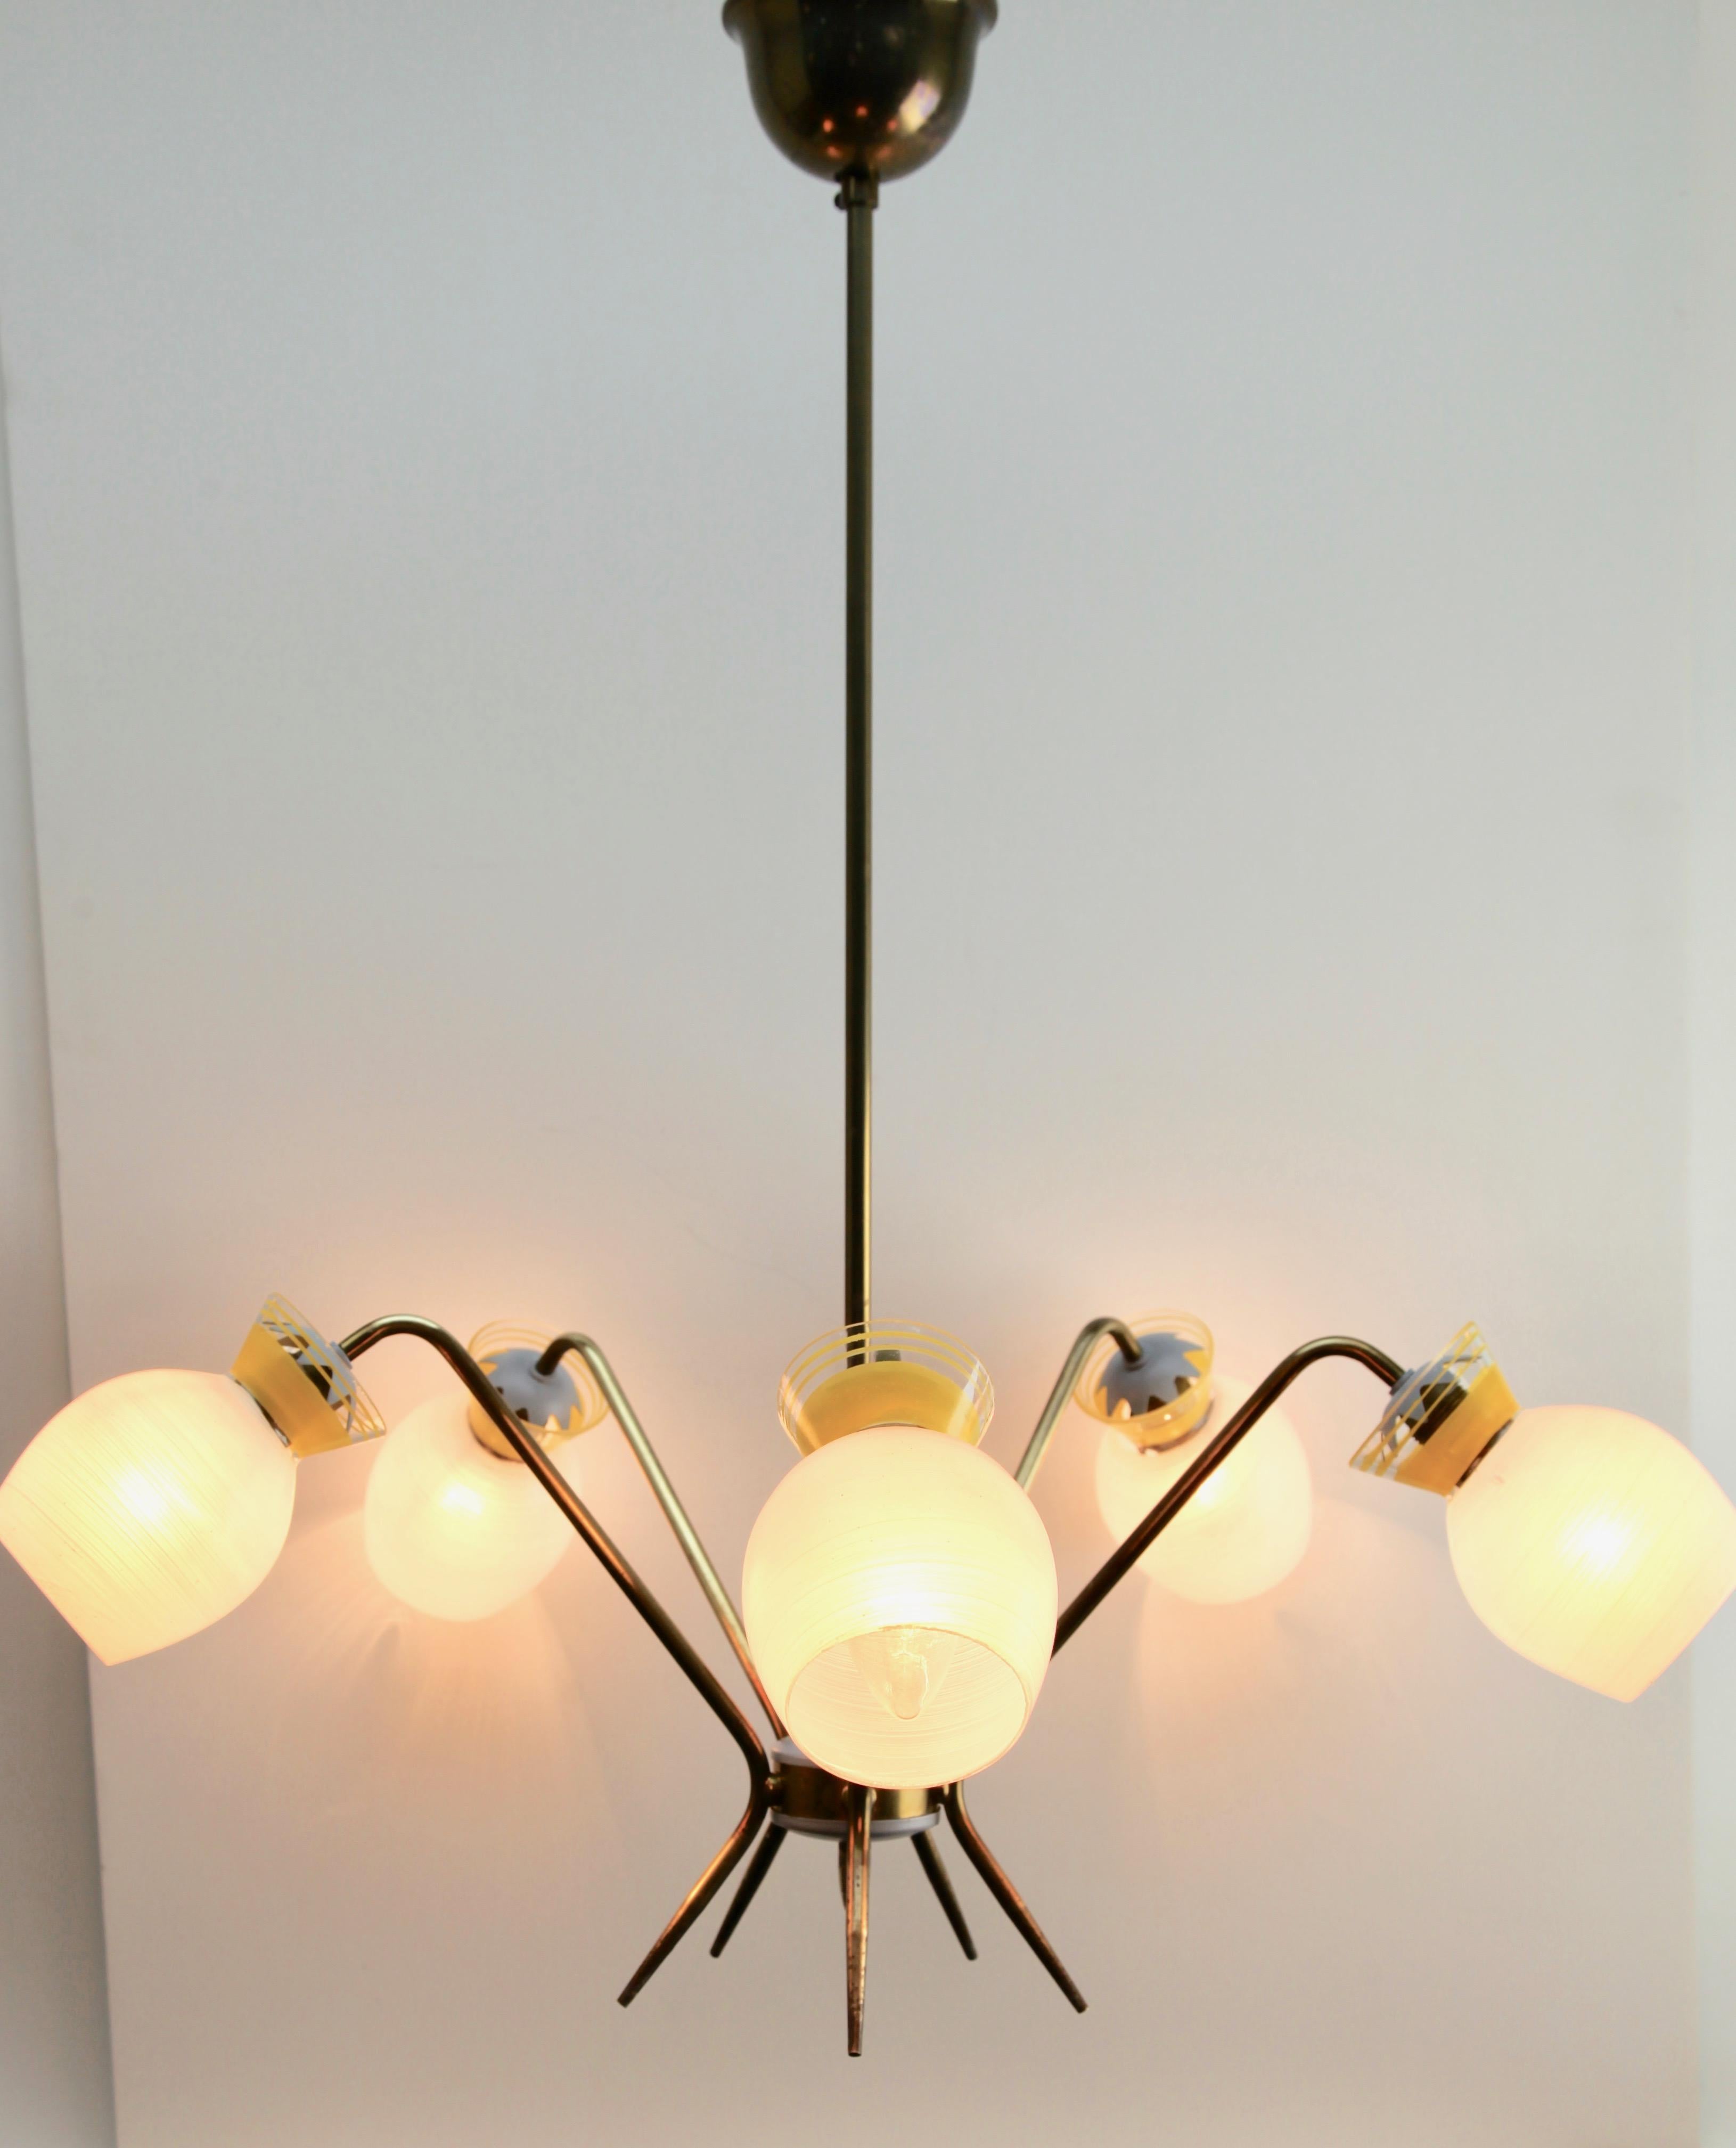 Hand-Crafted Vintage Chandelier Five Arms in the Style of Stilnovo, Italian, 1960s